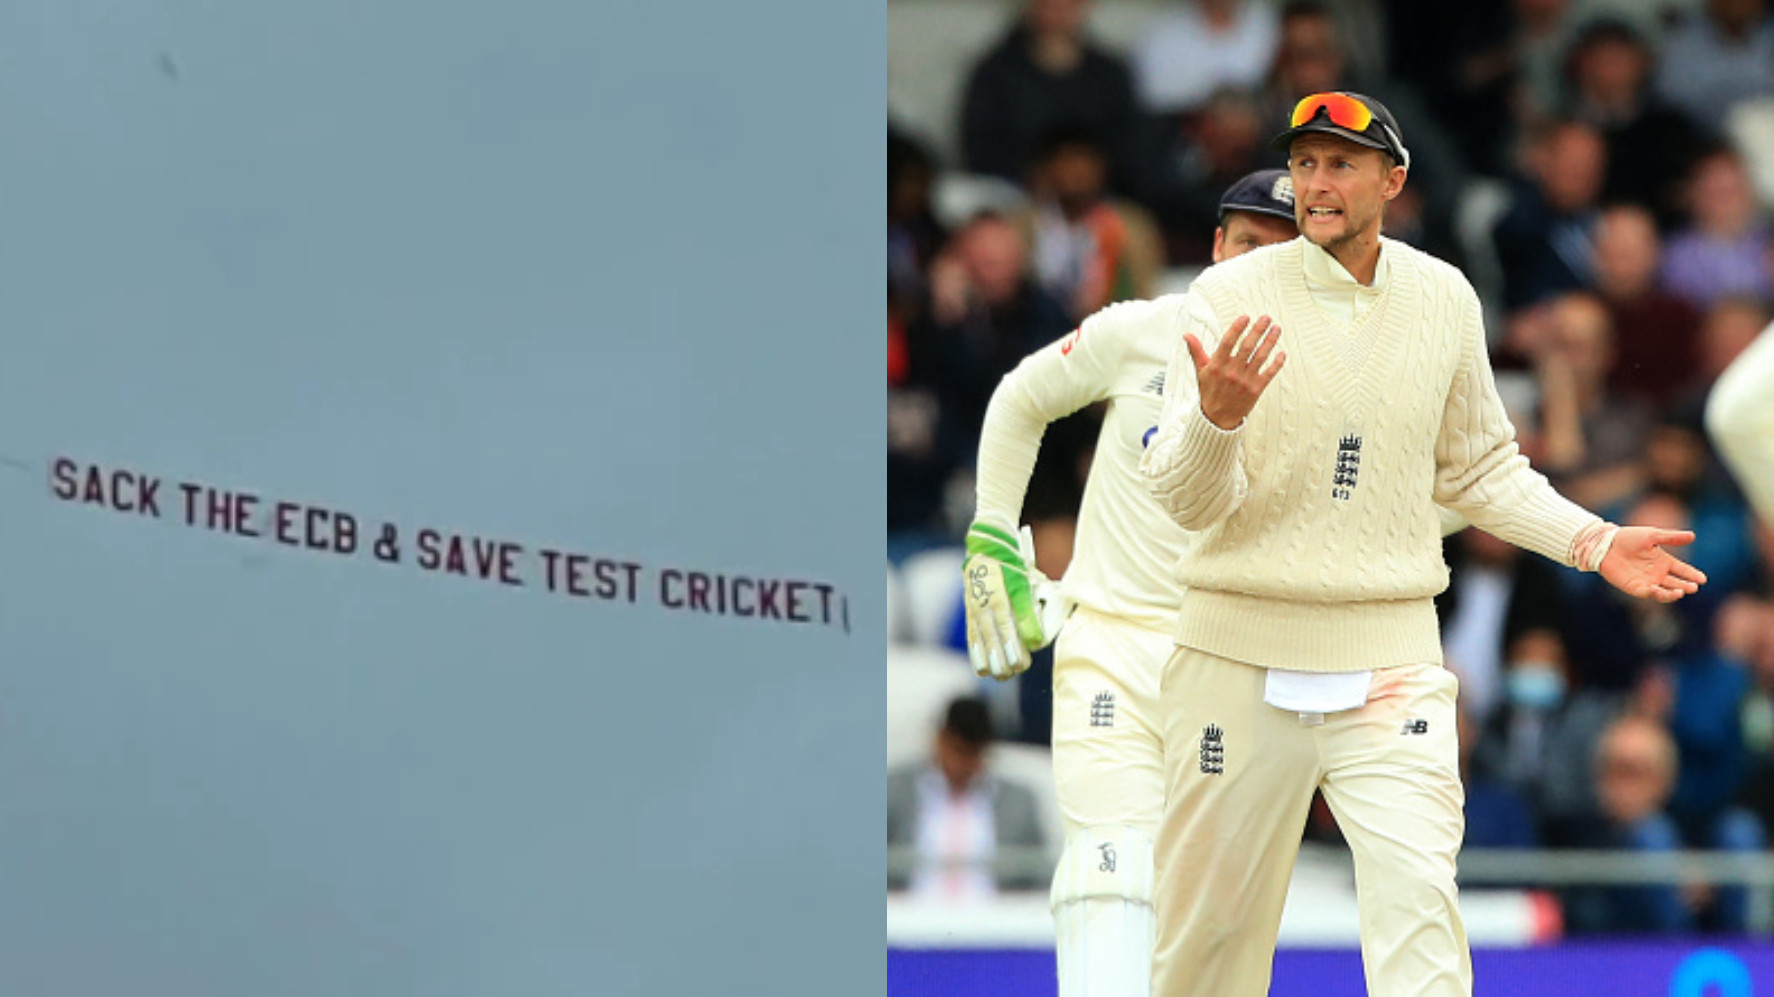 ENG v IND 2021: Plane flies over Headingley with message - 'Sack ECB and save Test cricket'